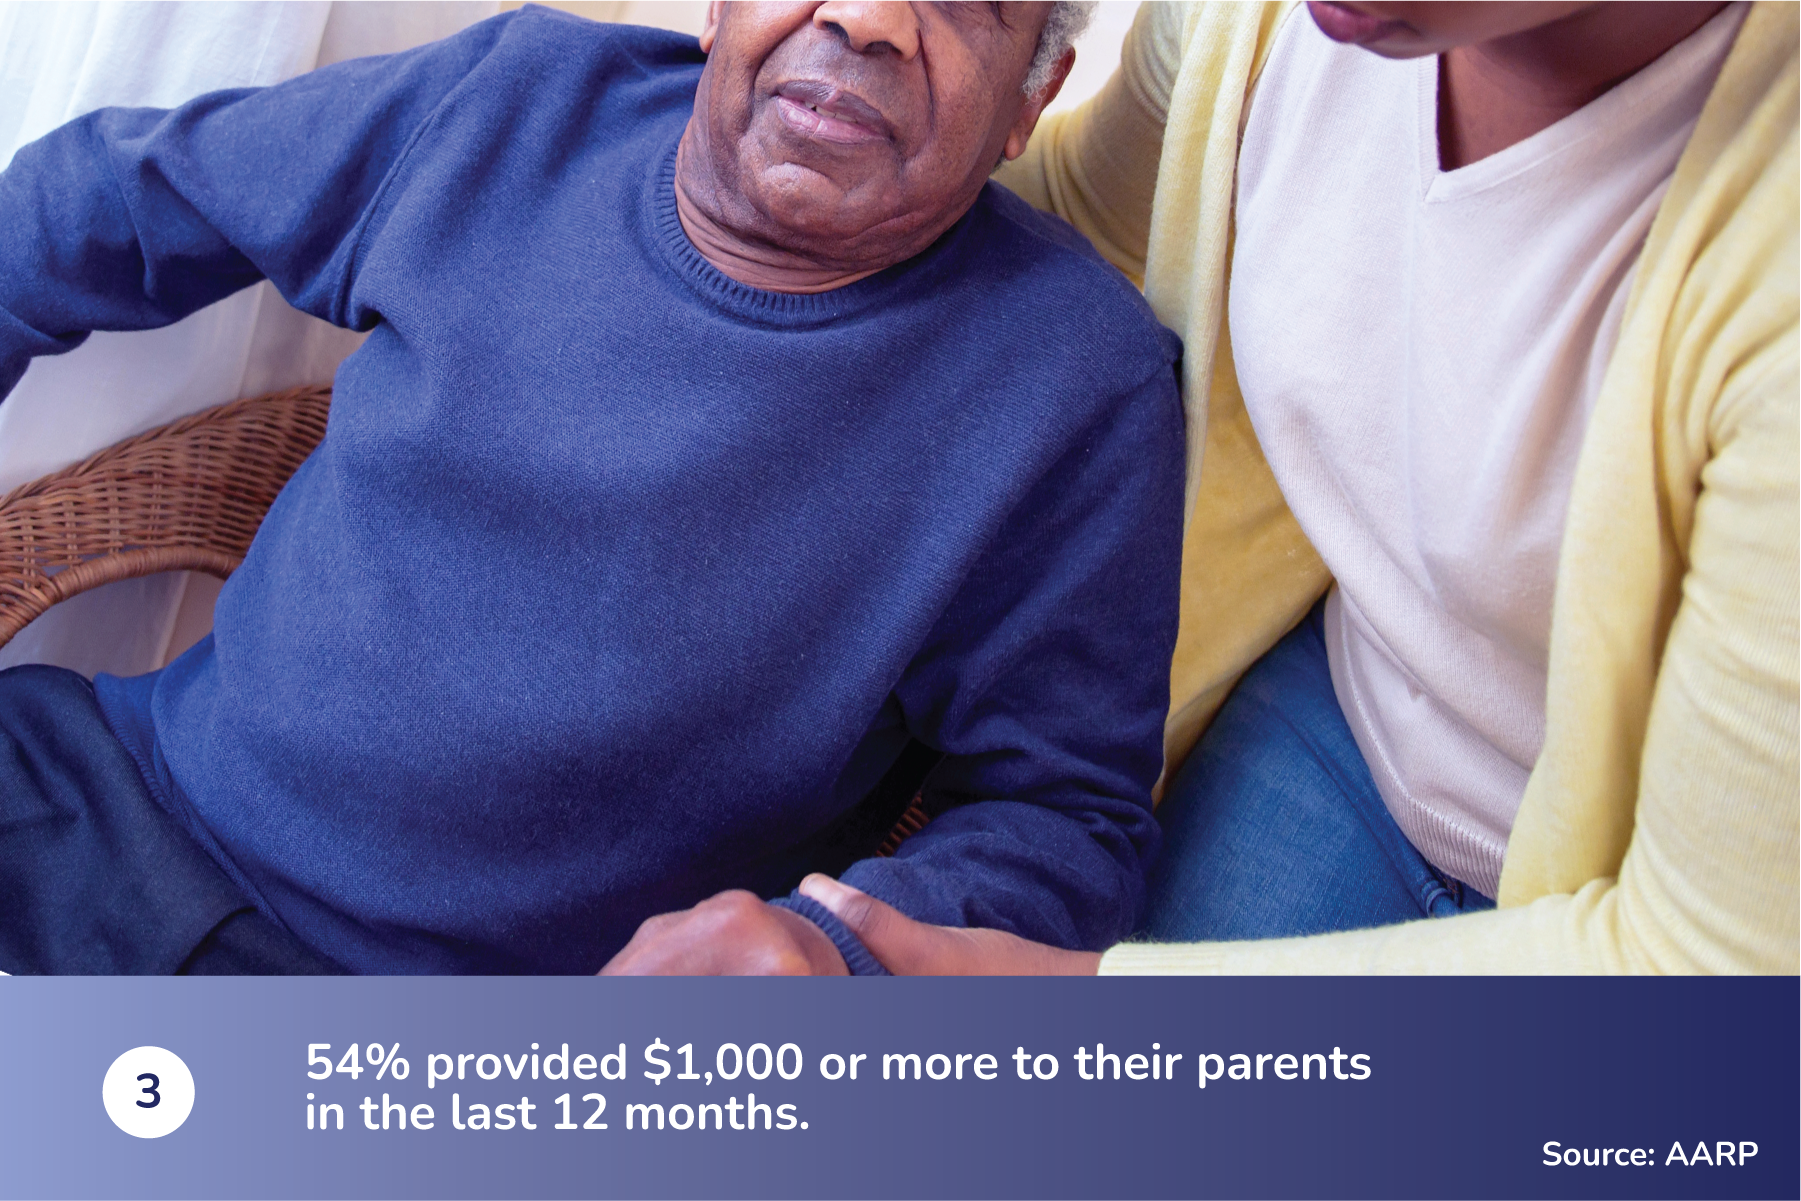 54% provided $1,000 or more to their parents in the last 12 months